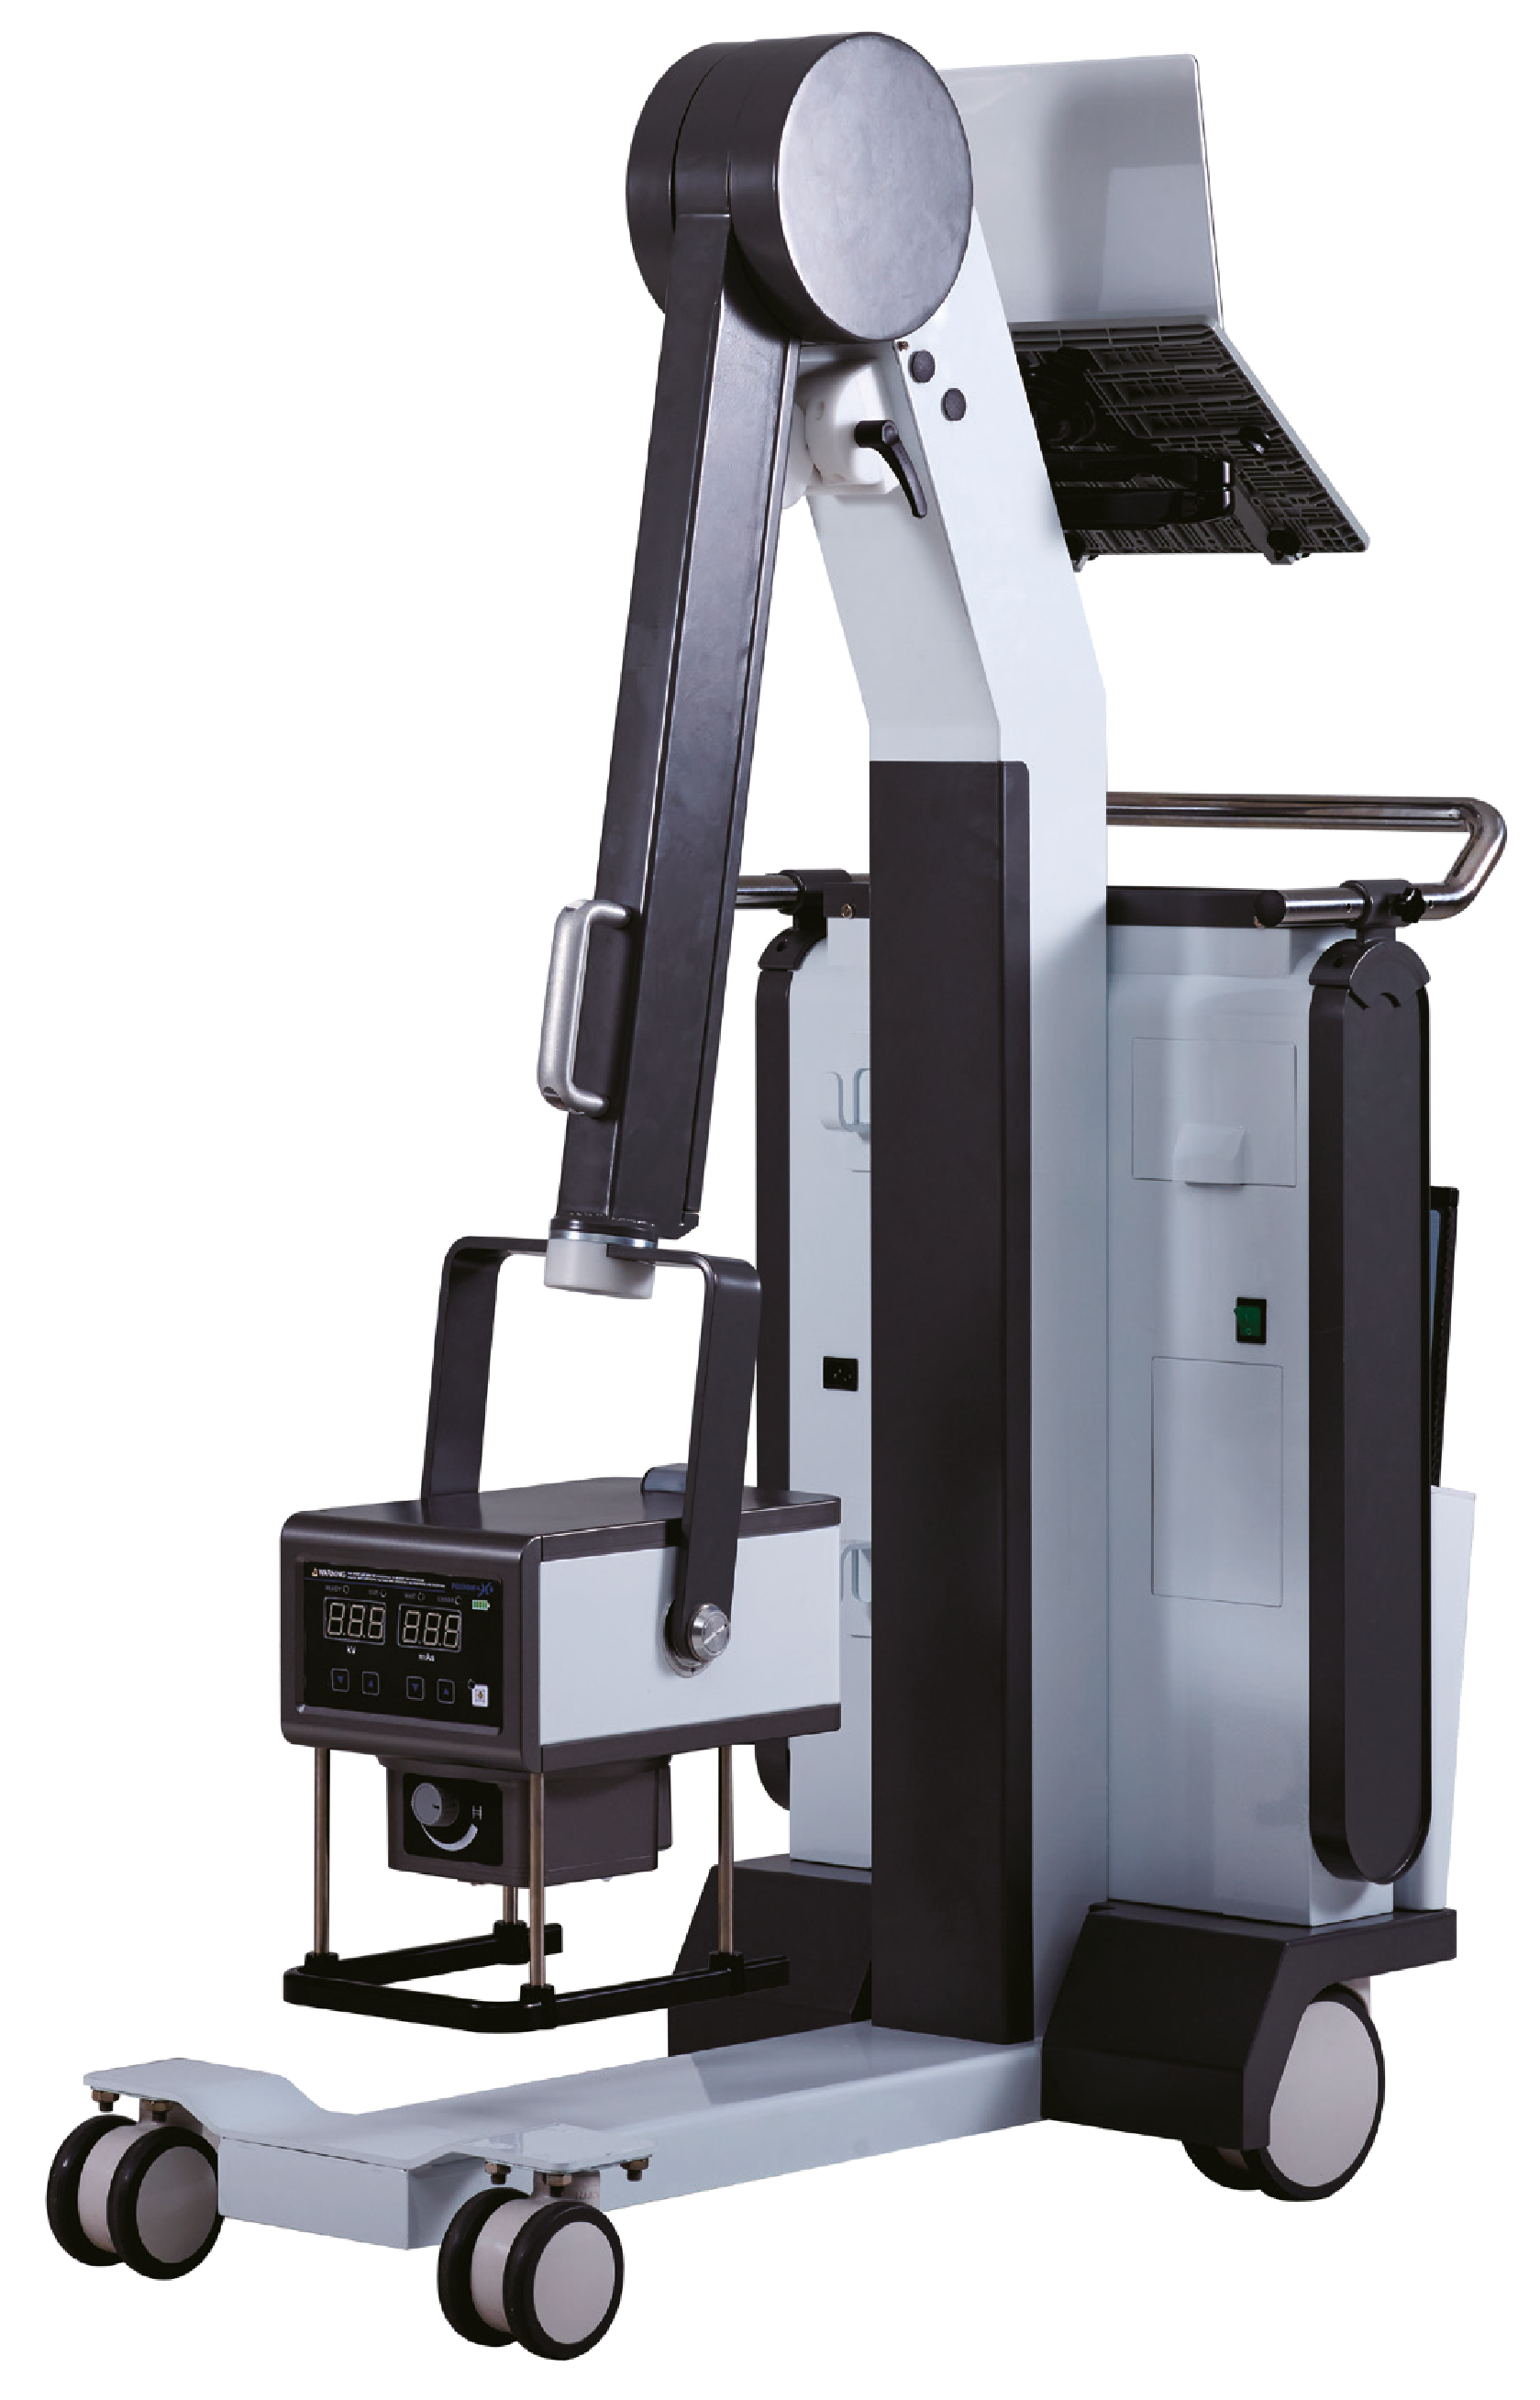 Atomic M1 Radiographic X-ray System